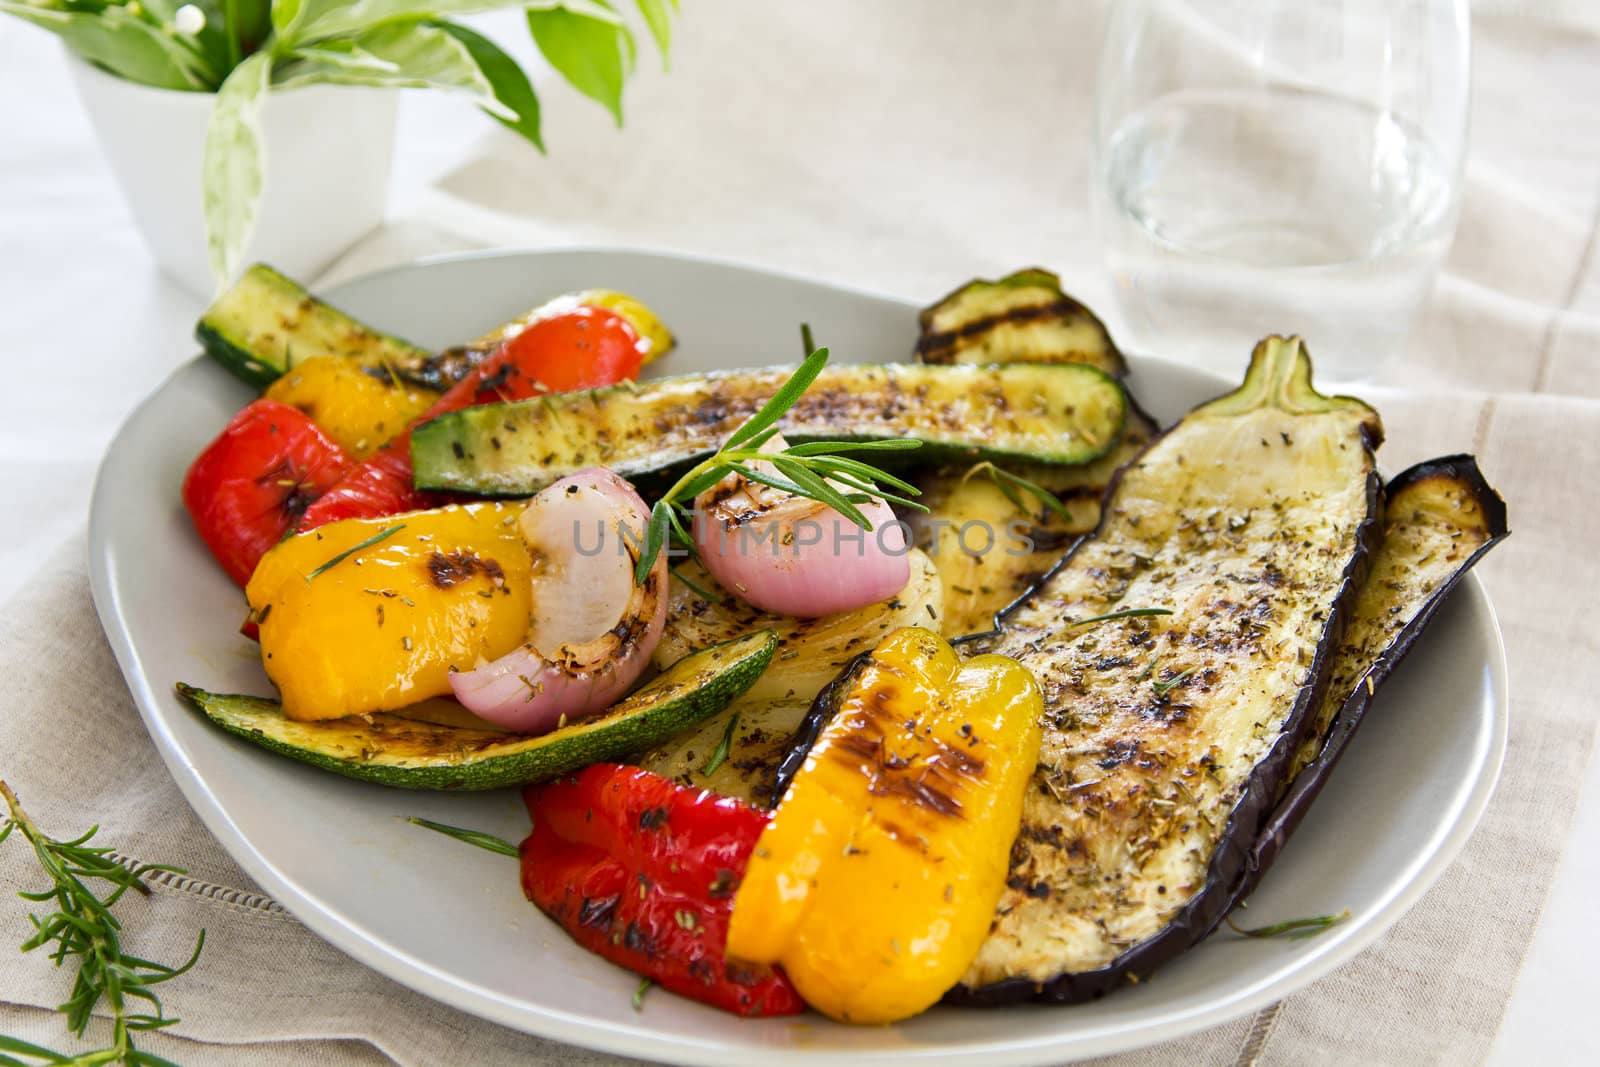 Grilled aubergine,zucchini,pepper,onion,with rosemary and spice salad